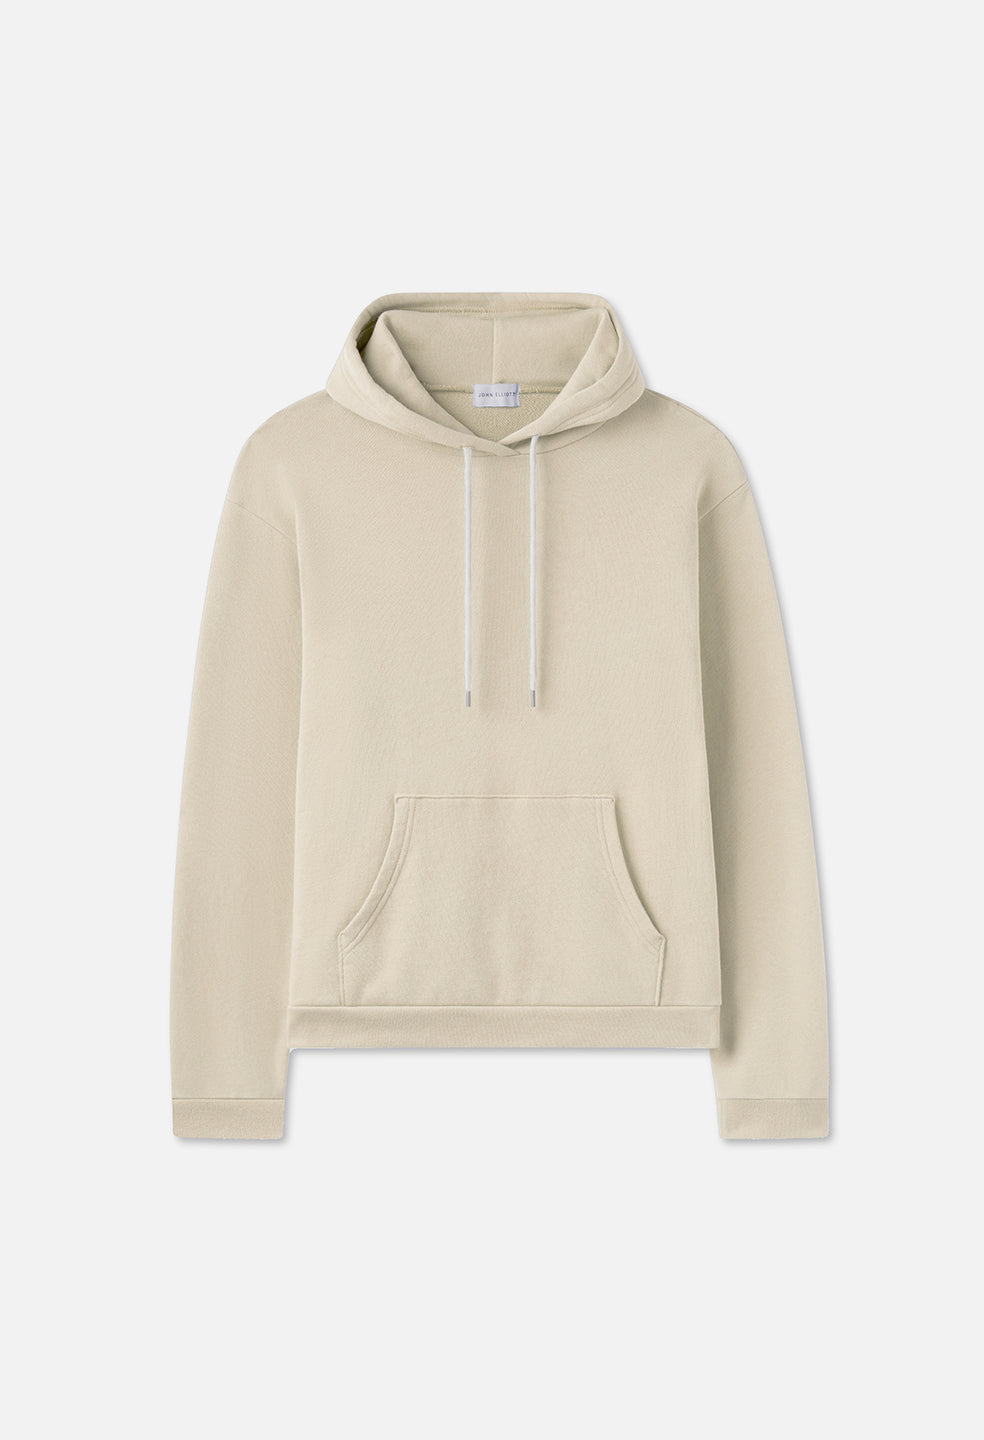 Beach hoodies>>>, Gallery posted by Cc